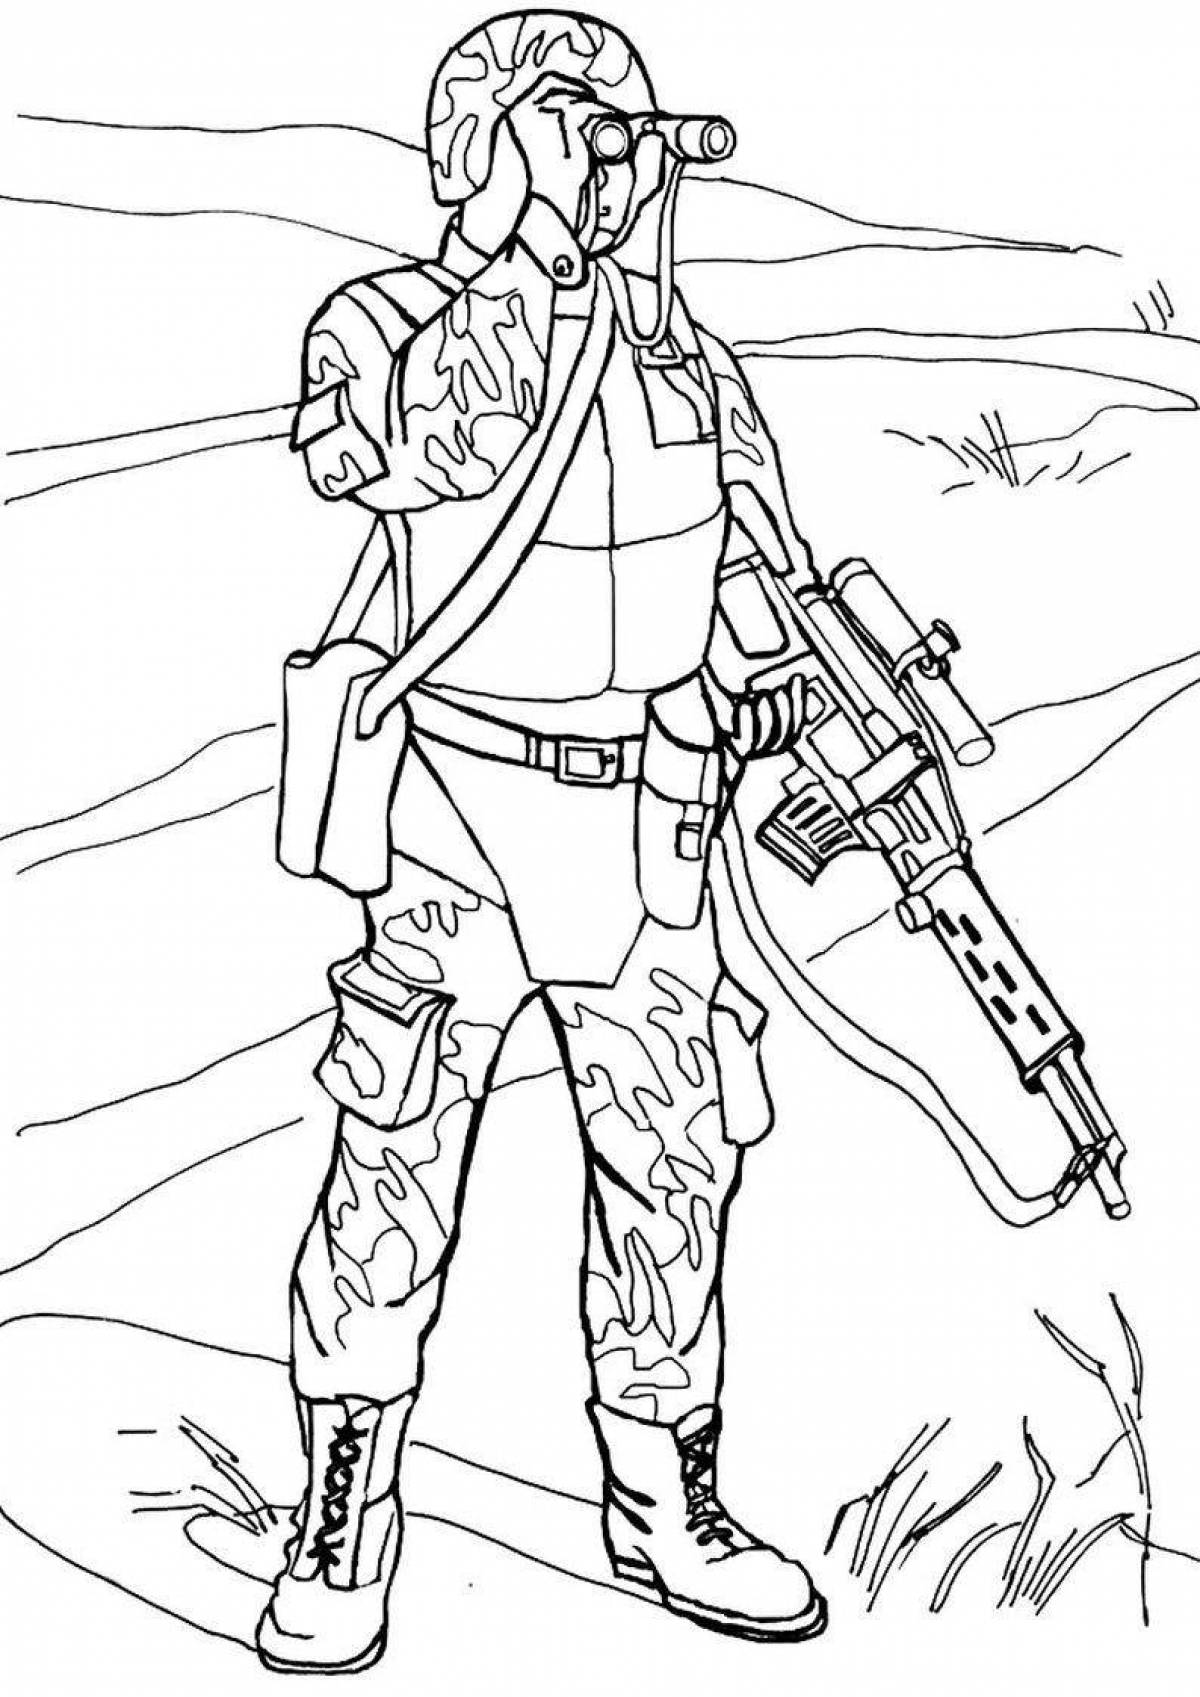 Inspiring modern soldier coloring book for kids